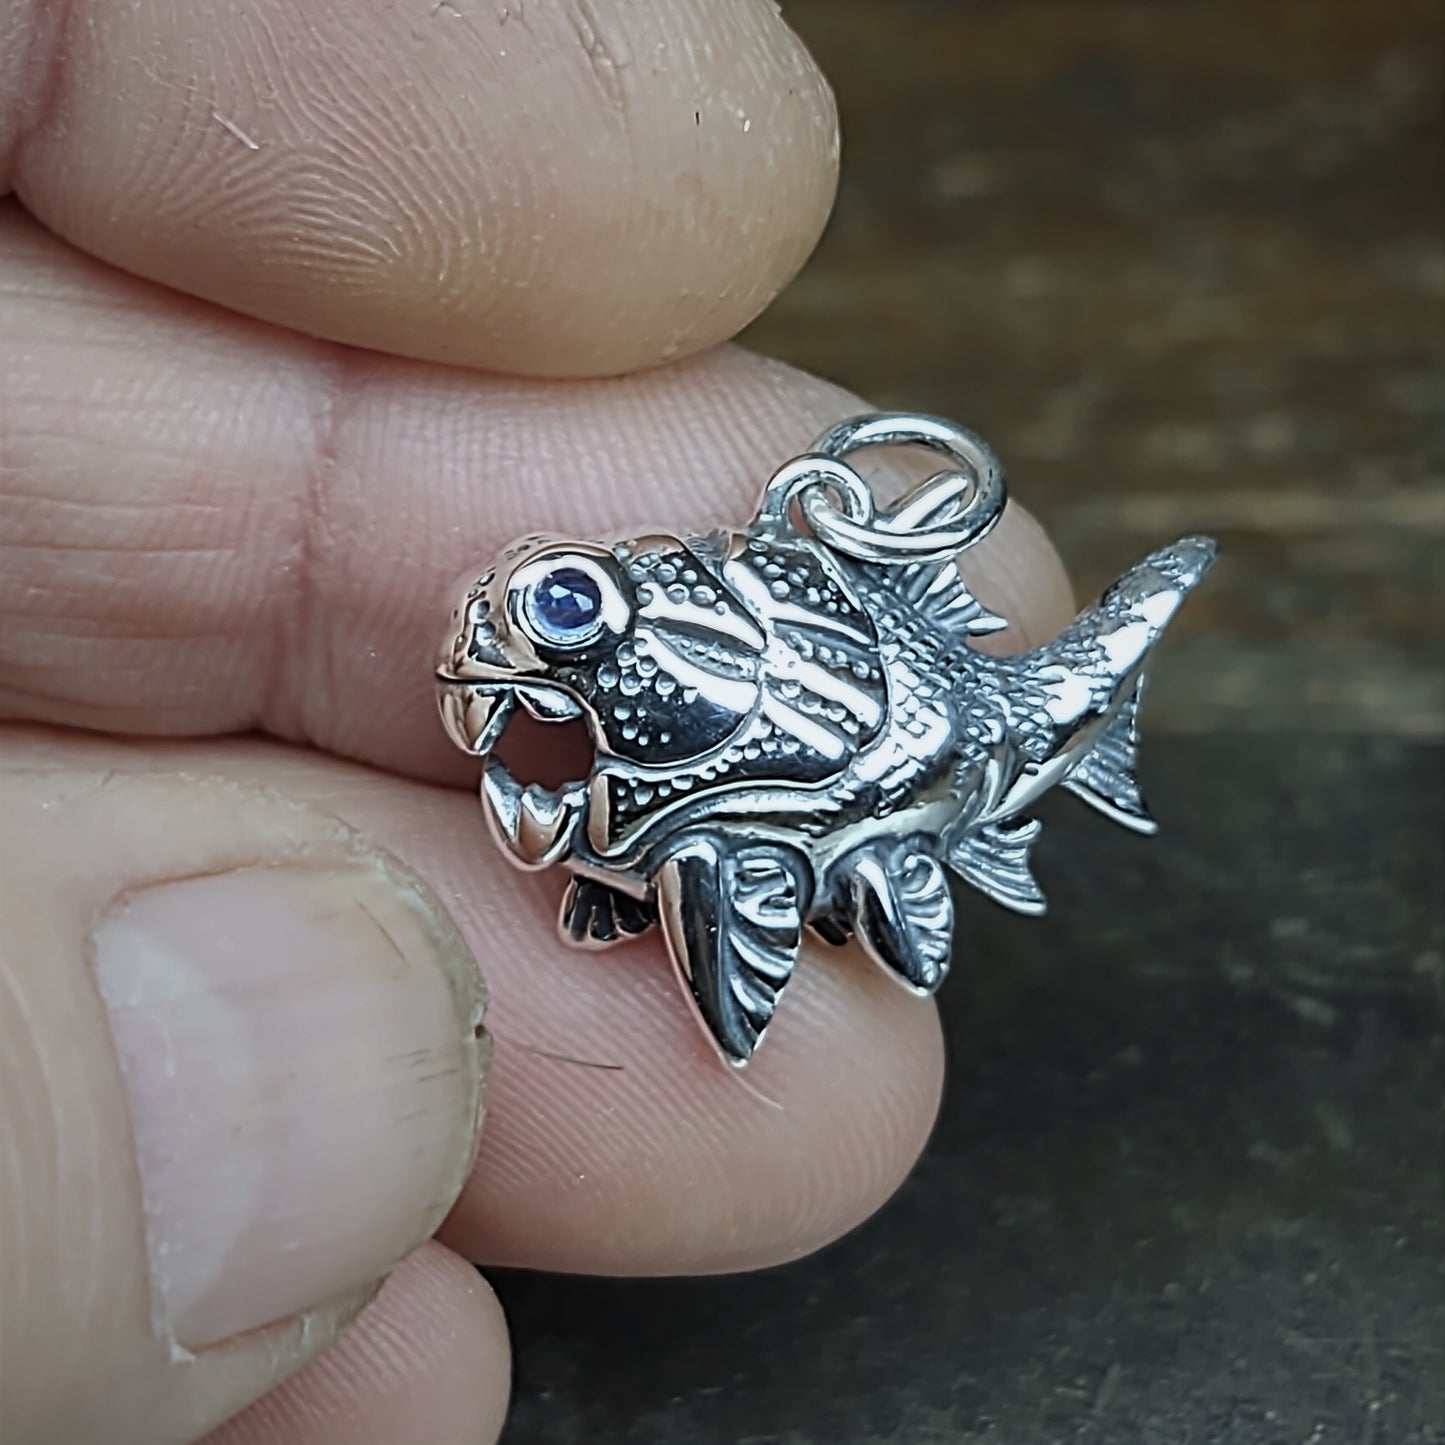 Dunkleosteus necklace. Made from sterling silver with an antiqued finish, set with a gemstone eye. Prehistoric fish pendant © Adrian Ashley